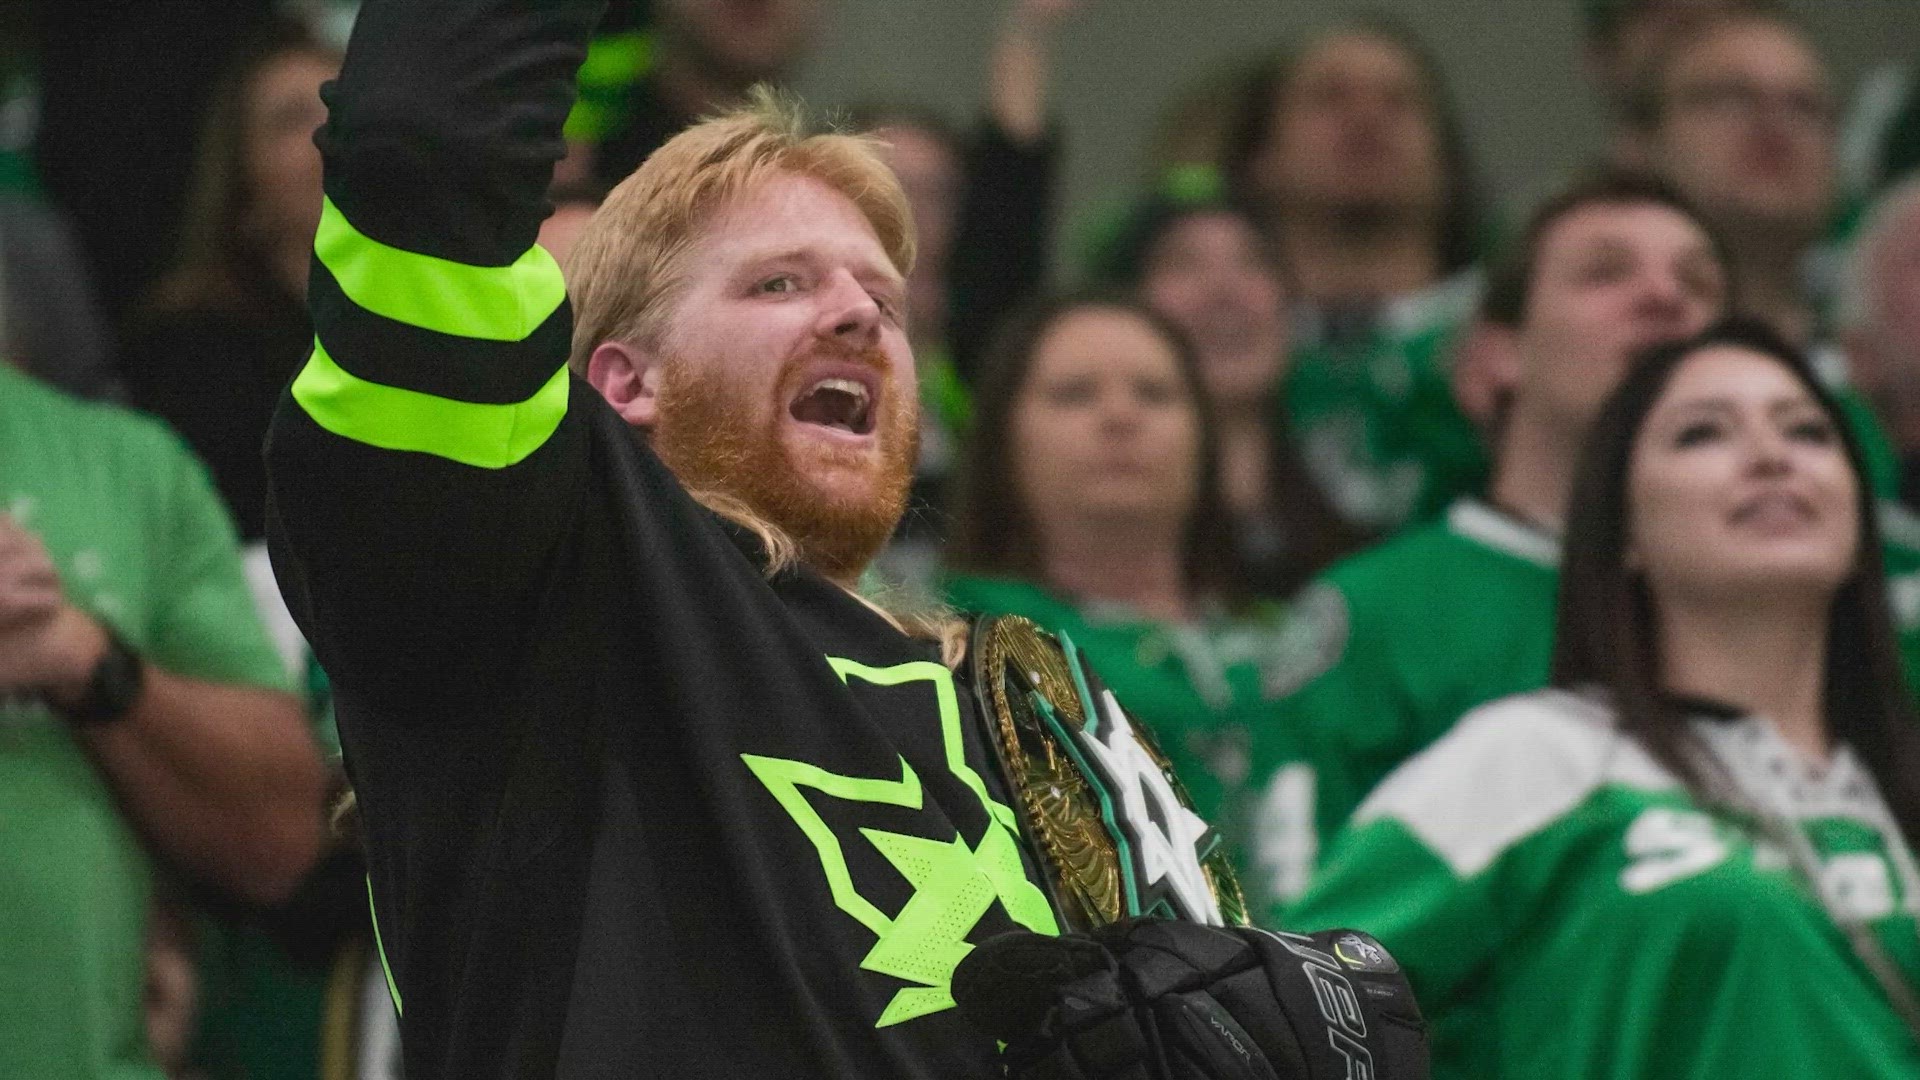 The Dallas Stars have reported sellout crowds for its three home playoff games in the first round.